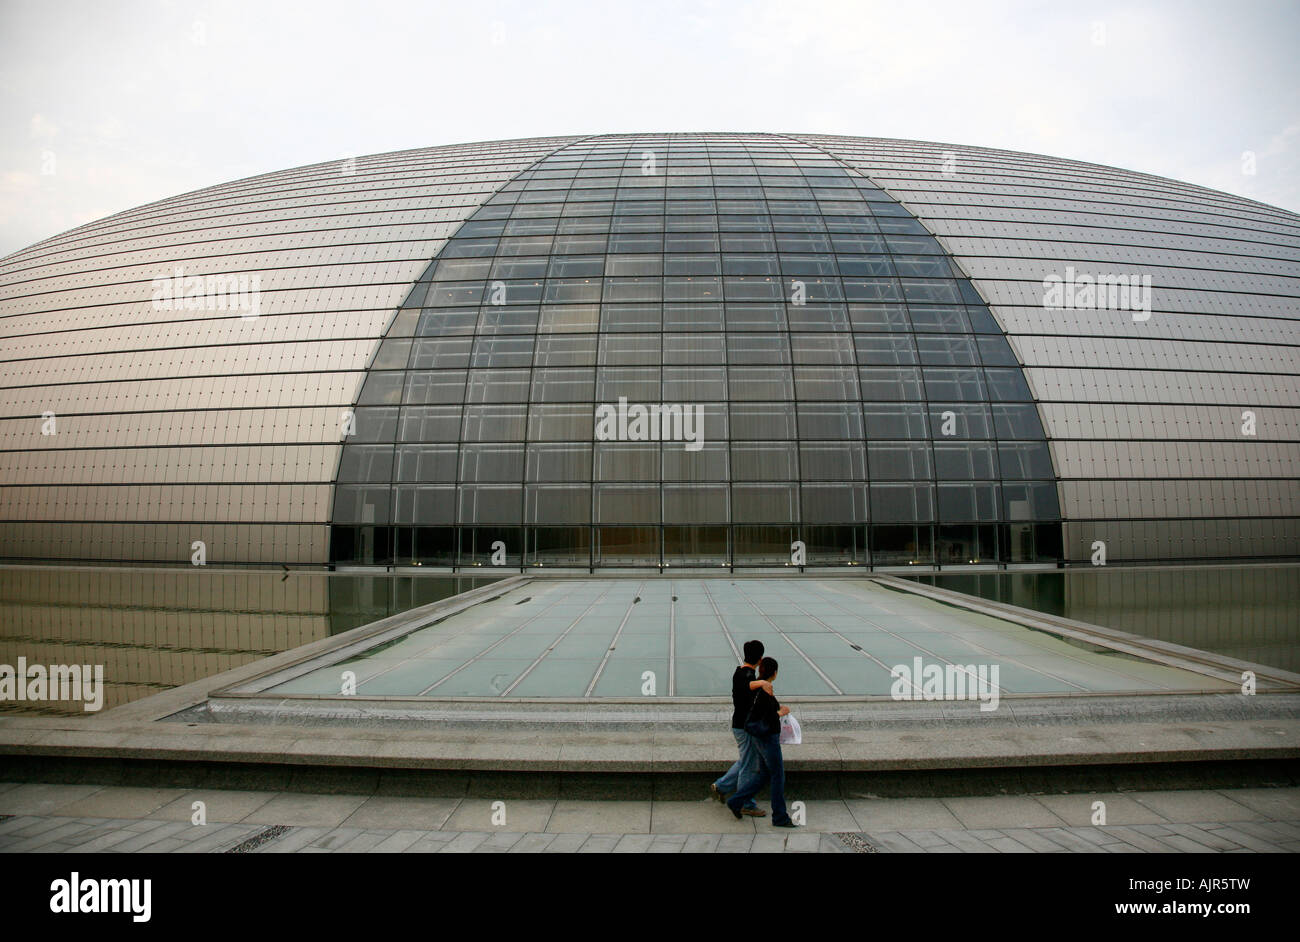 The National Grand Theater designed by French architect Paul Andreu Beijing China Stock Photo